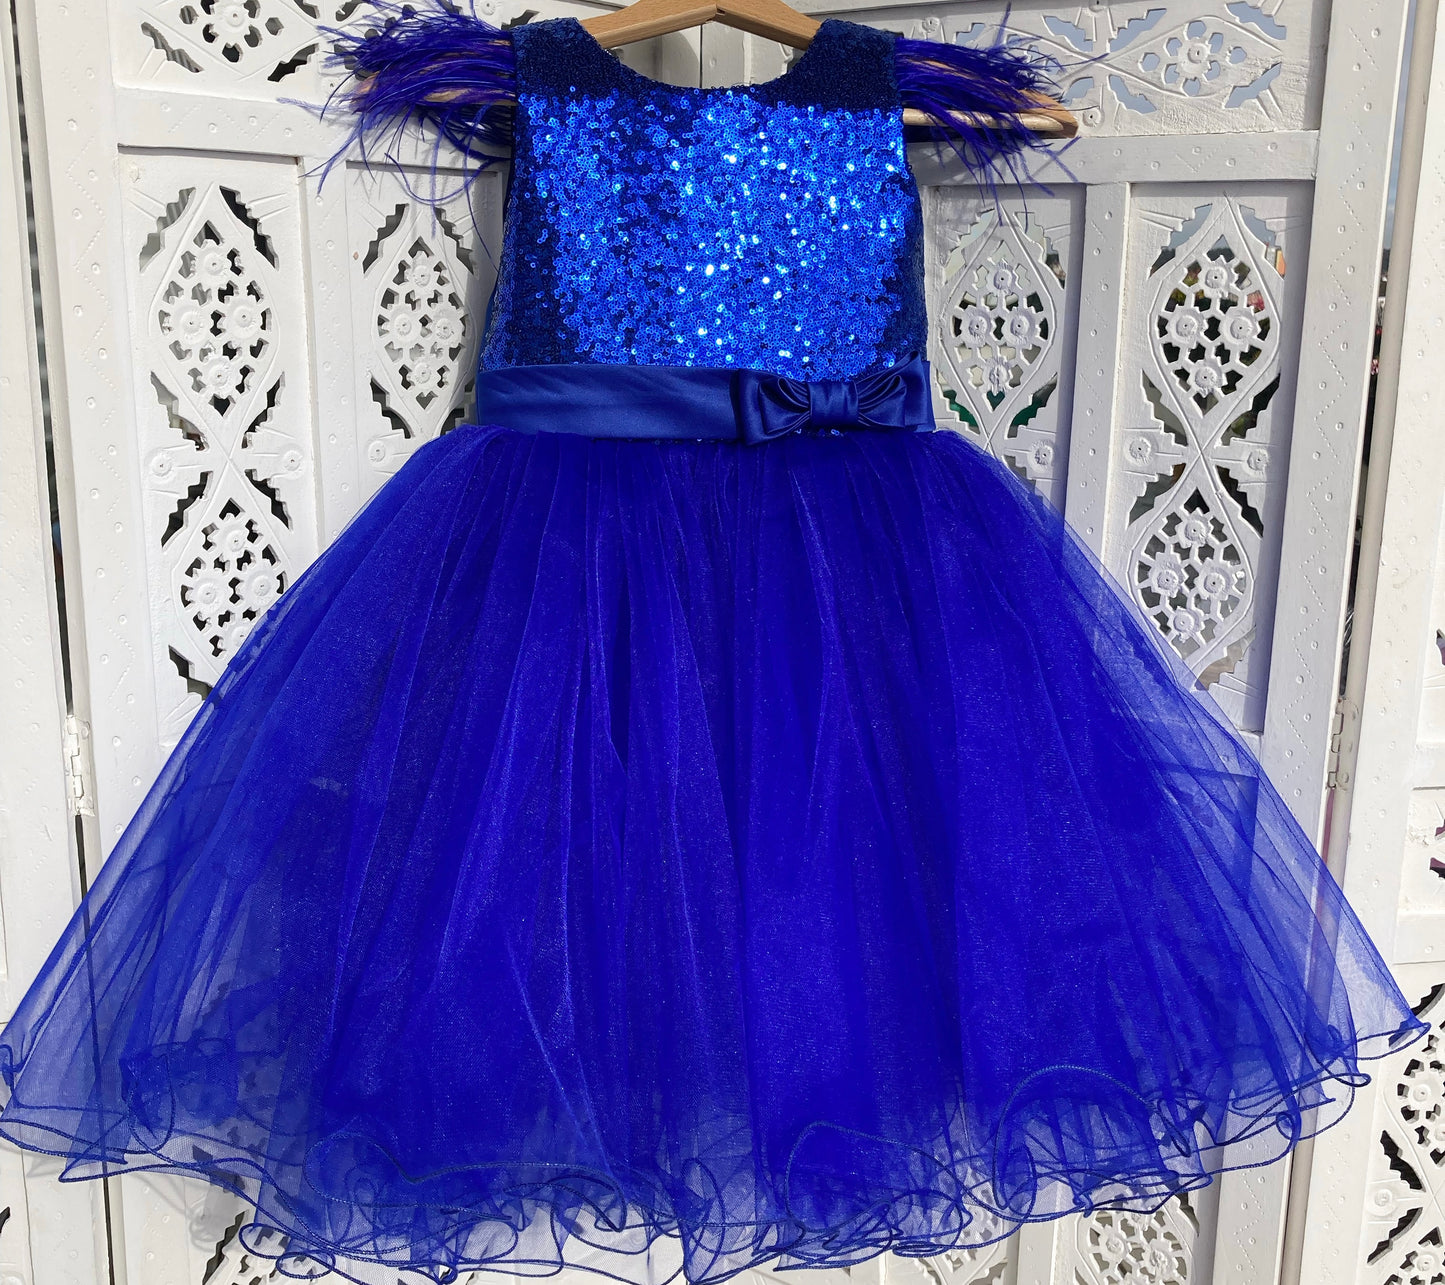 Blue Sequin Dress with Feathers